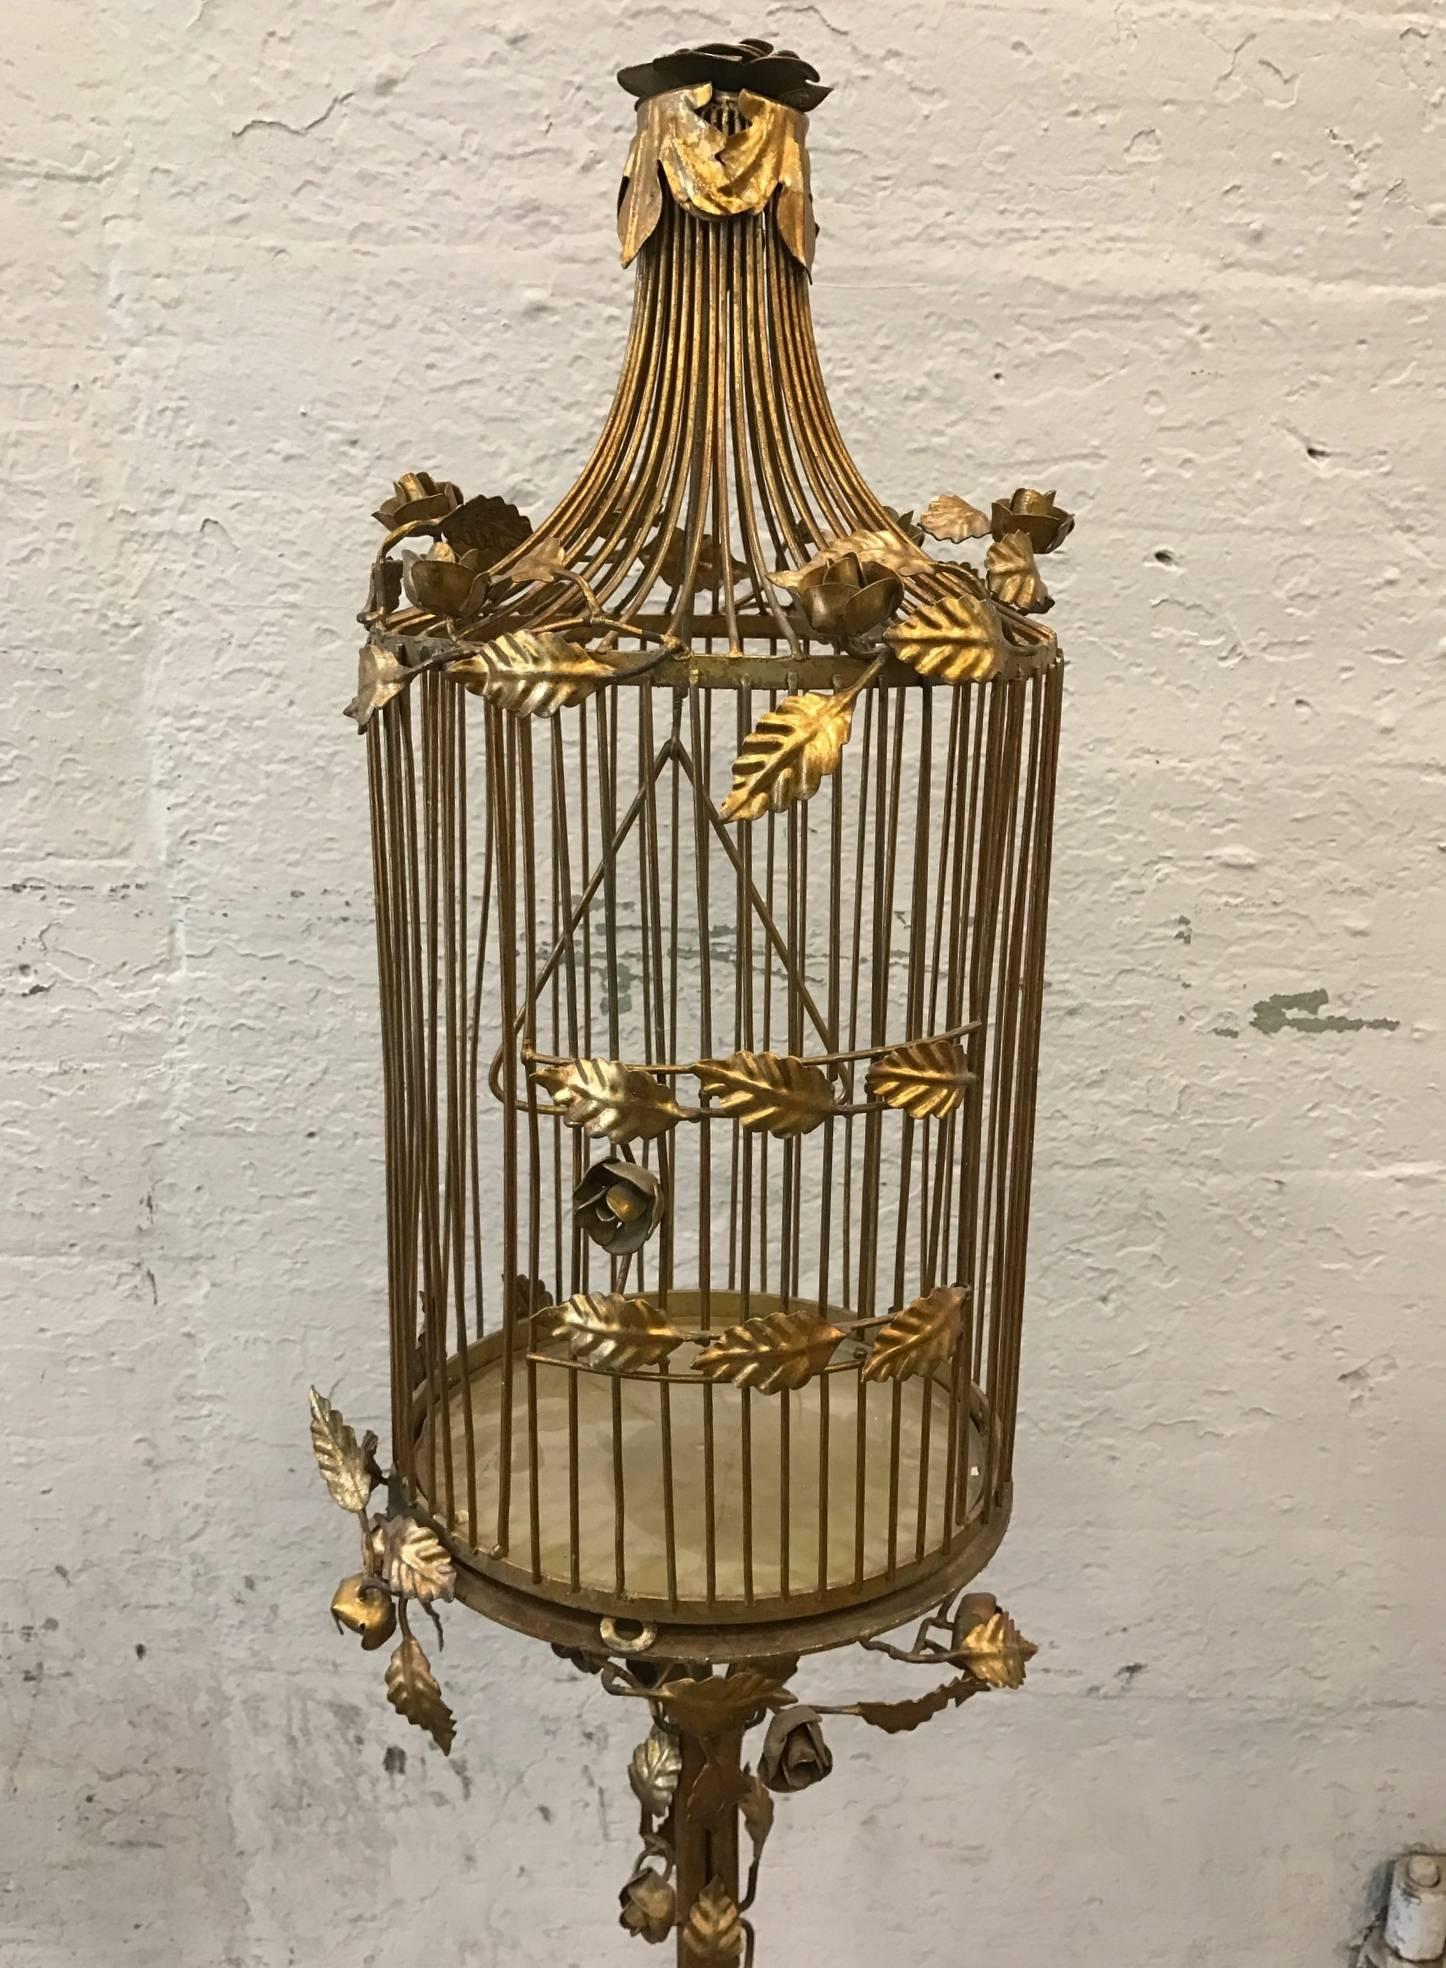 Vintage iron gilt bird cage with marble base. Cage has a decorative floral pattern and a slide out tray. 